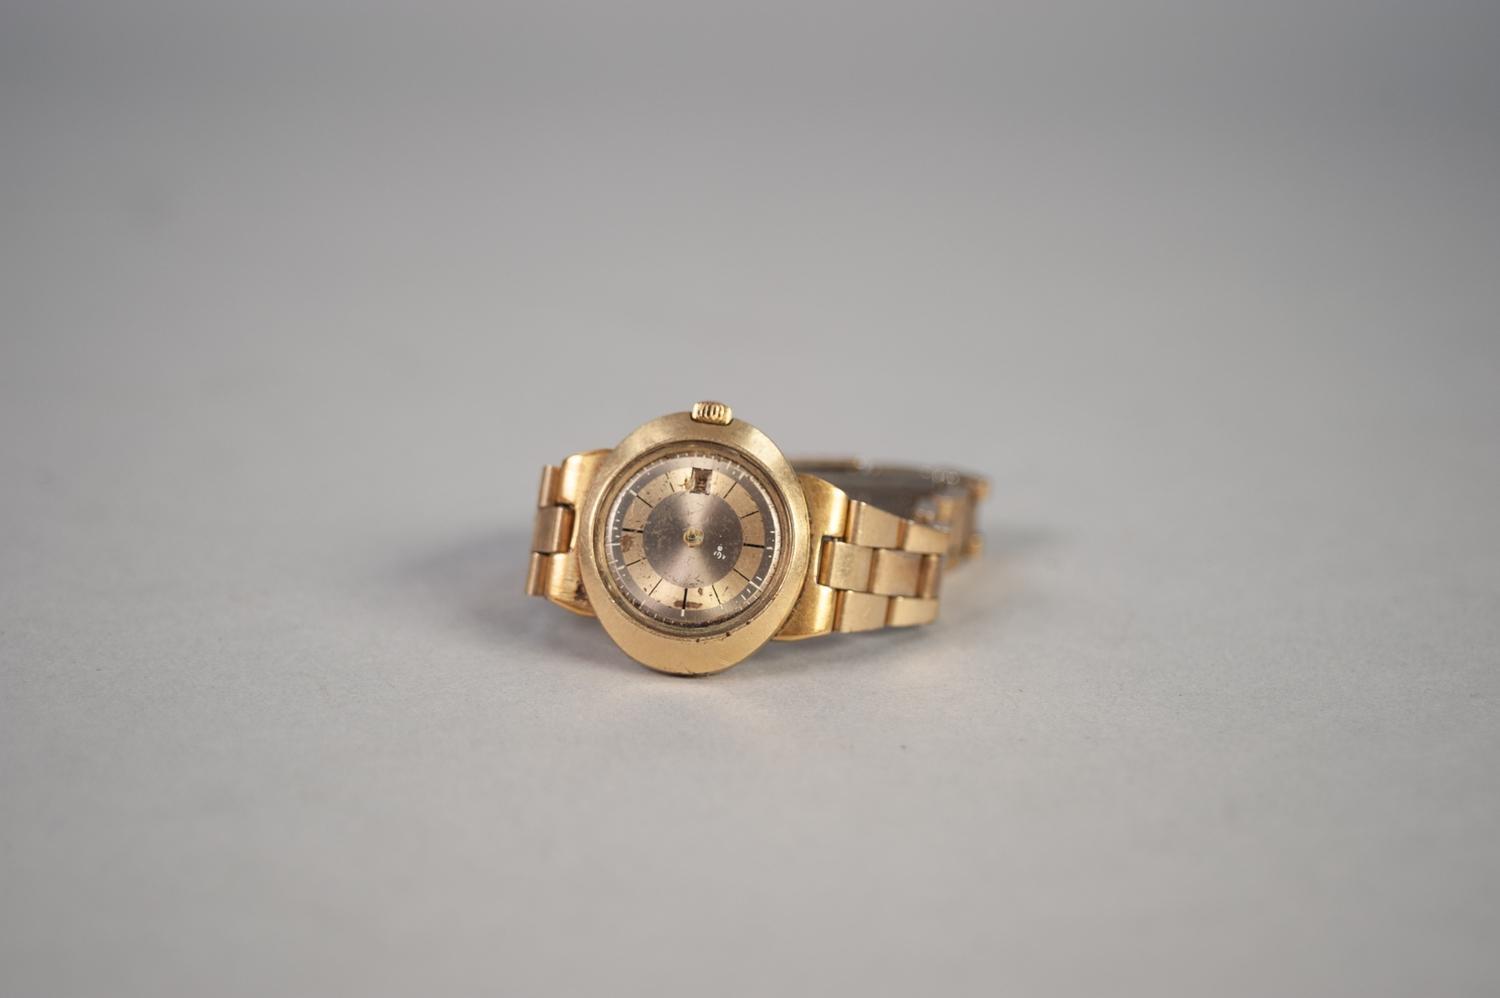 LADY'S OMEGA, GENEVE, 'DYNAMIC' WRIST WATCH, with round silvered dial with batons and date